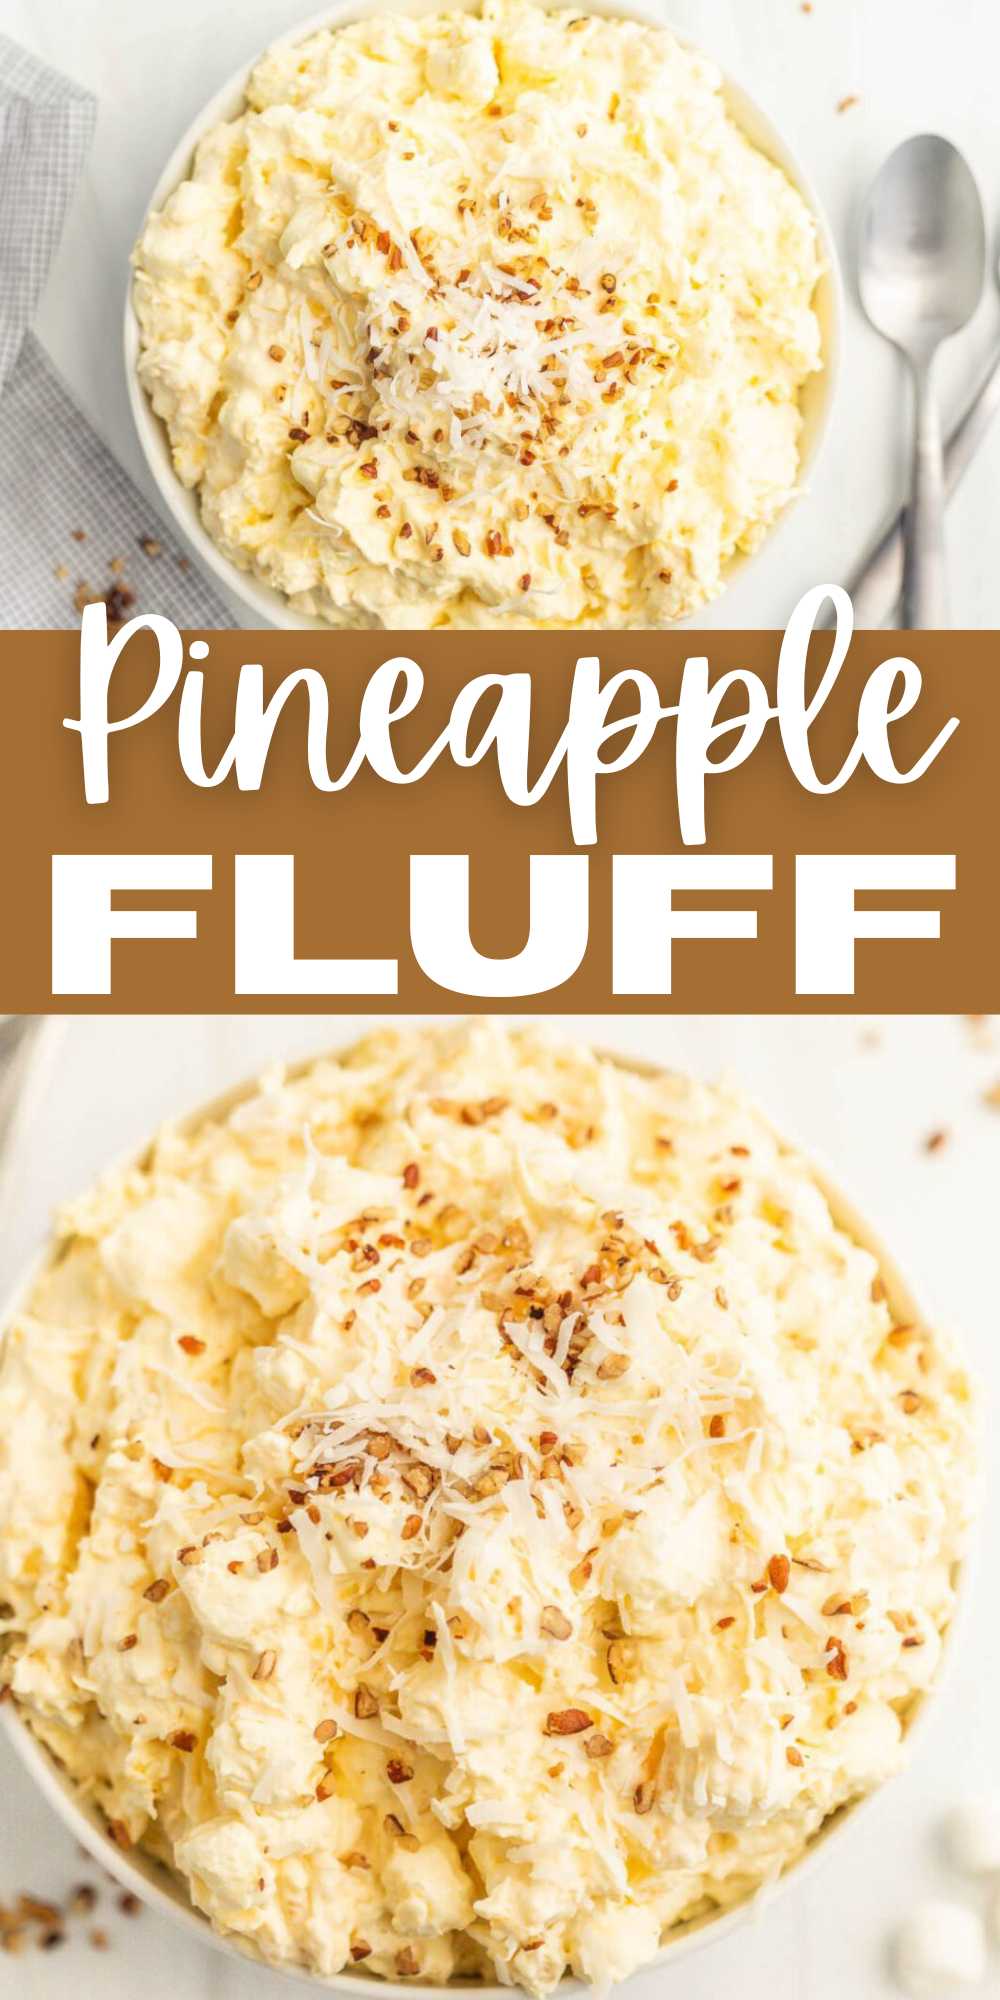 This Pineapple Fluff is the perfect side dish and full of tropical flavors. This pineapple fluff salad is made with simple ingredients. You can change the ingredients or add in your favorites. It is very light but also so decadent. I love it because it isn’t too heavy and can easily be served anytime of year. #eatingonadime #pineapplefluff #pineappledessert